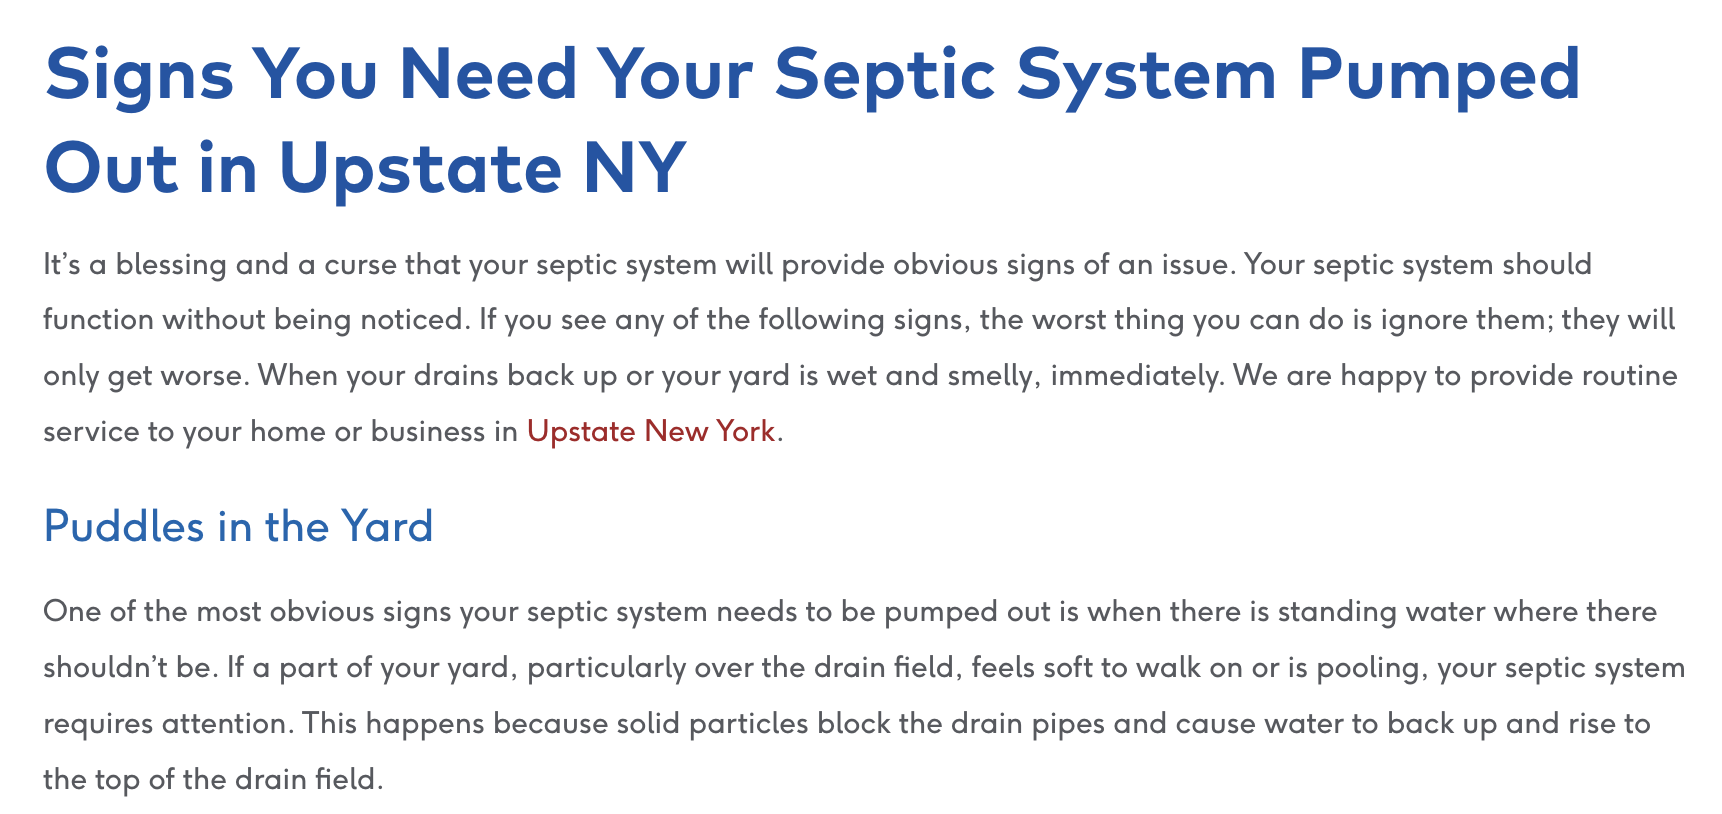 Signs You Need Your Septic System Pumped Out in Upstate NY